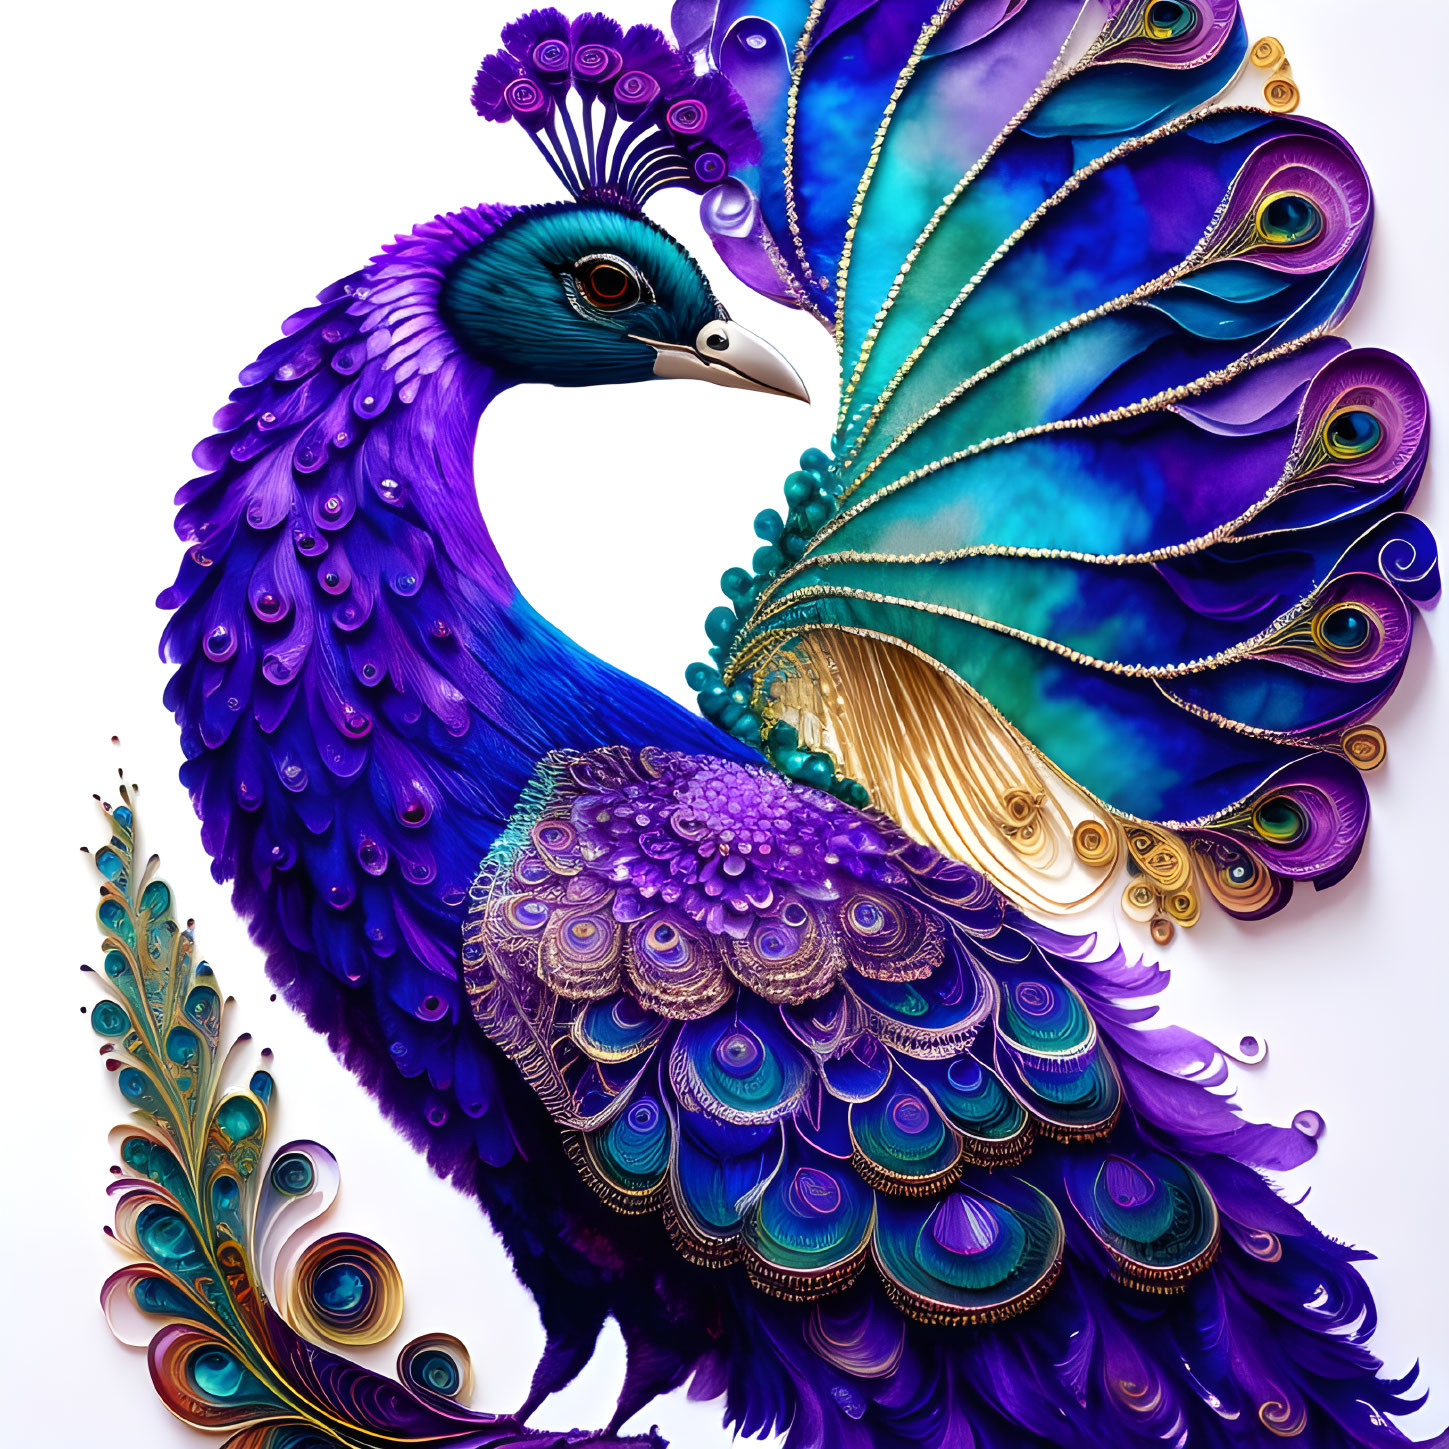 Colorful Peacock Illustration with Elaborate Blue, Purple, and Gold Plumage